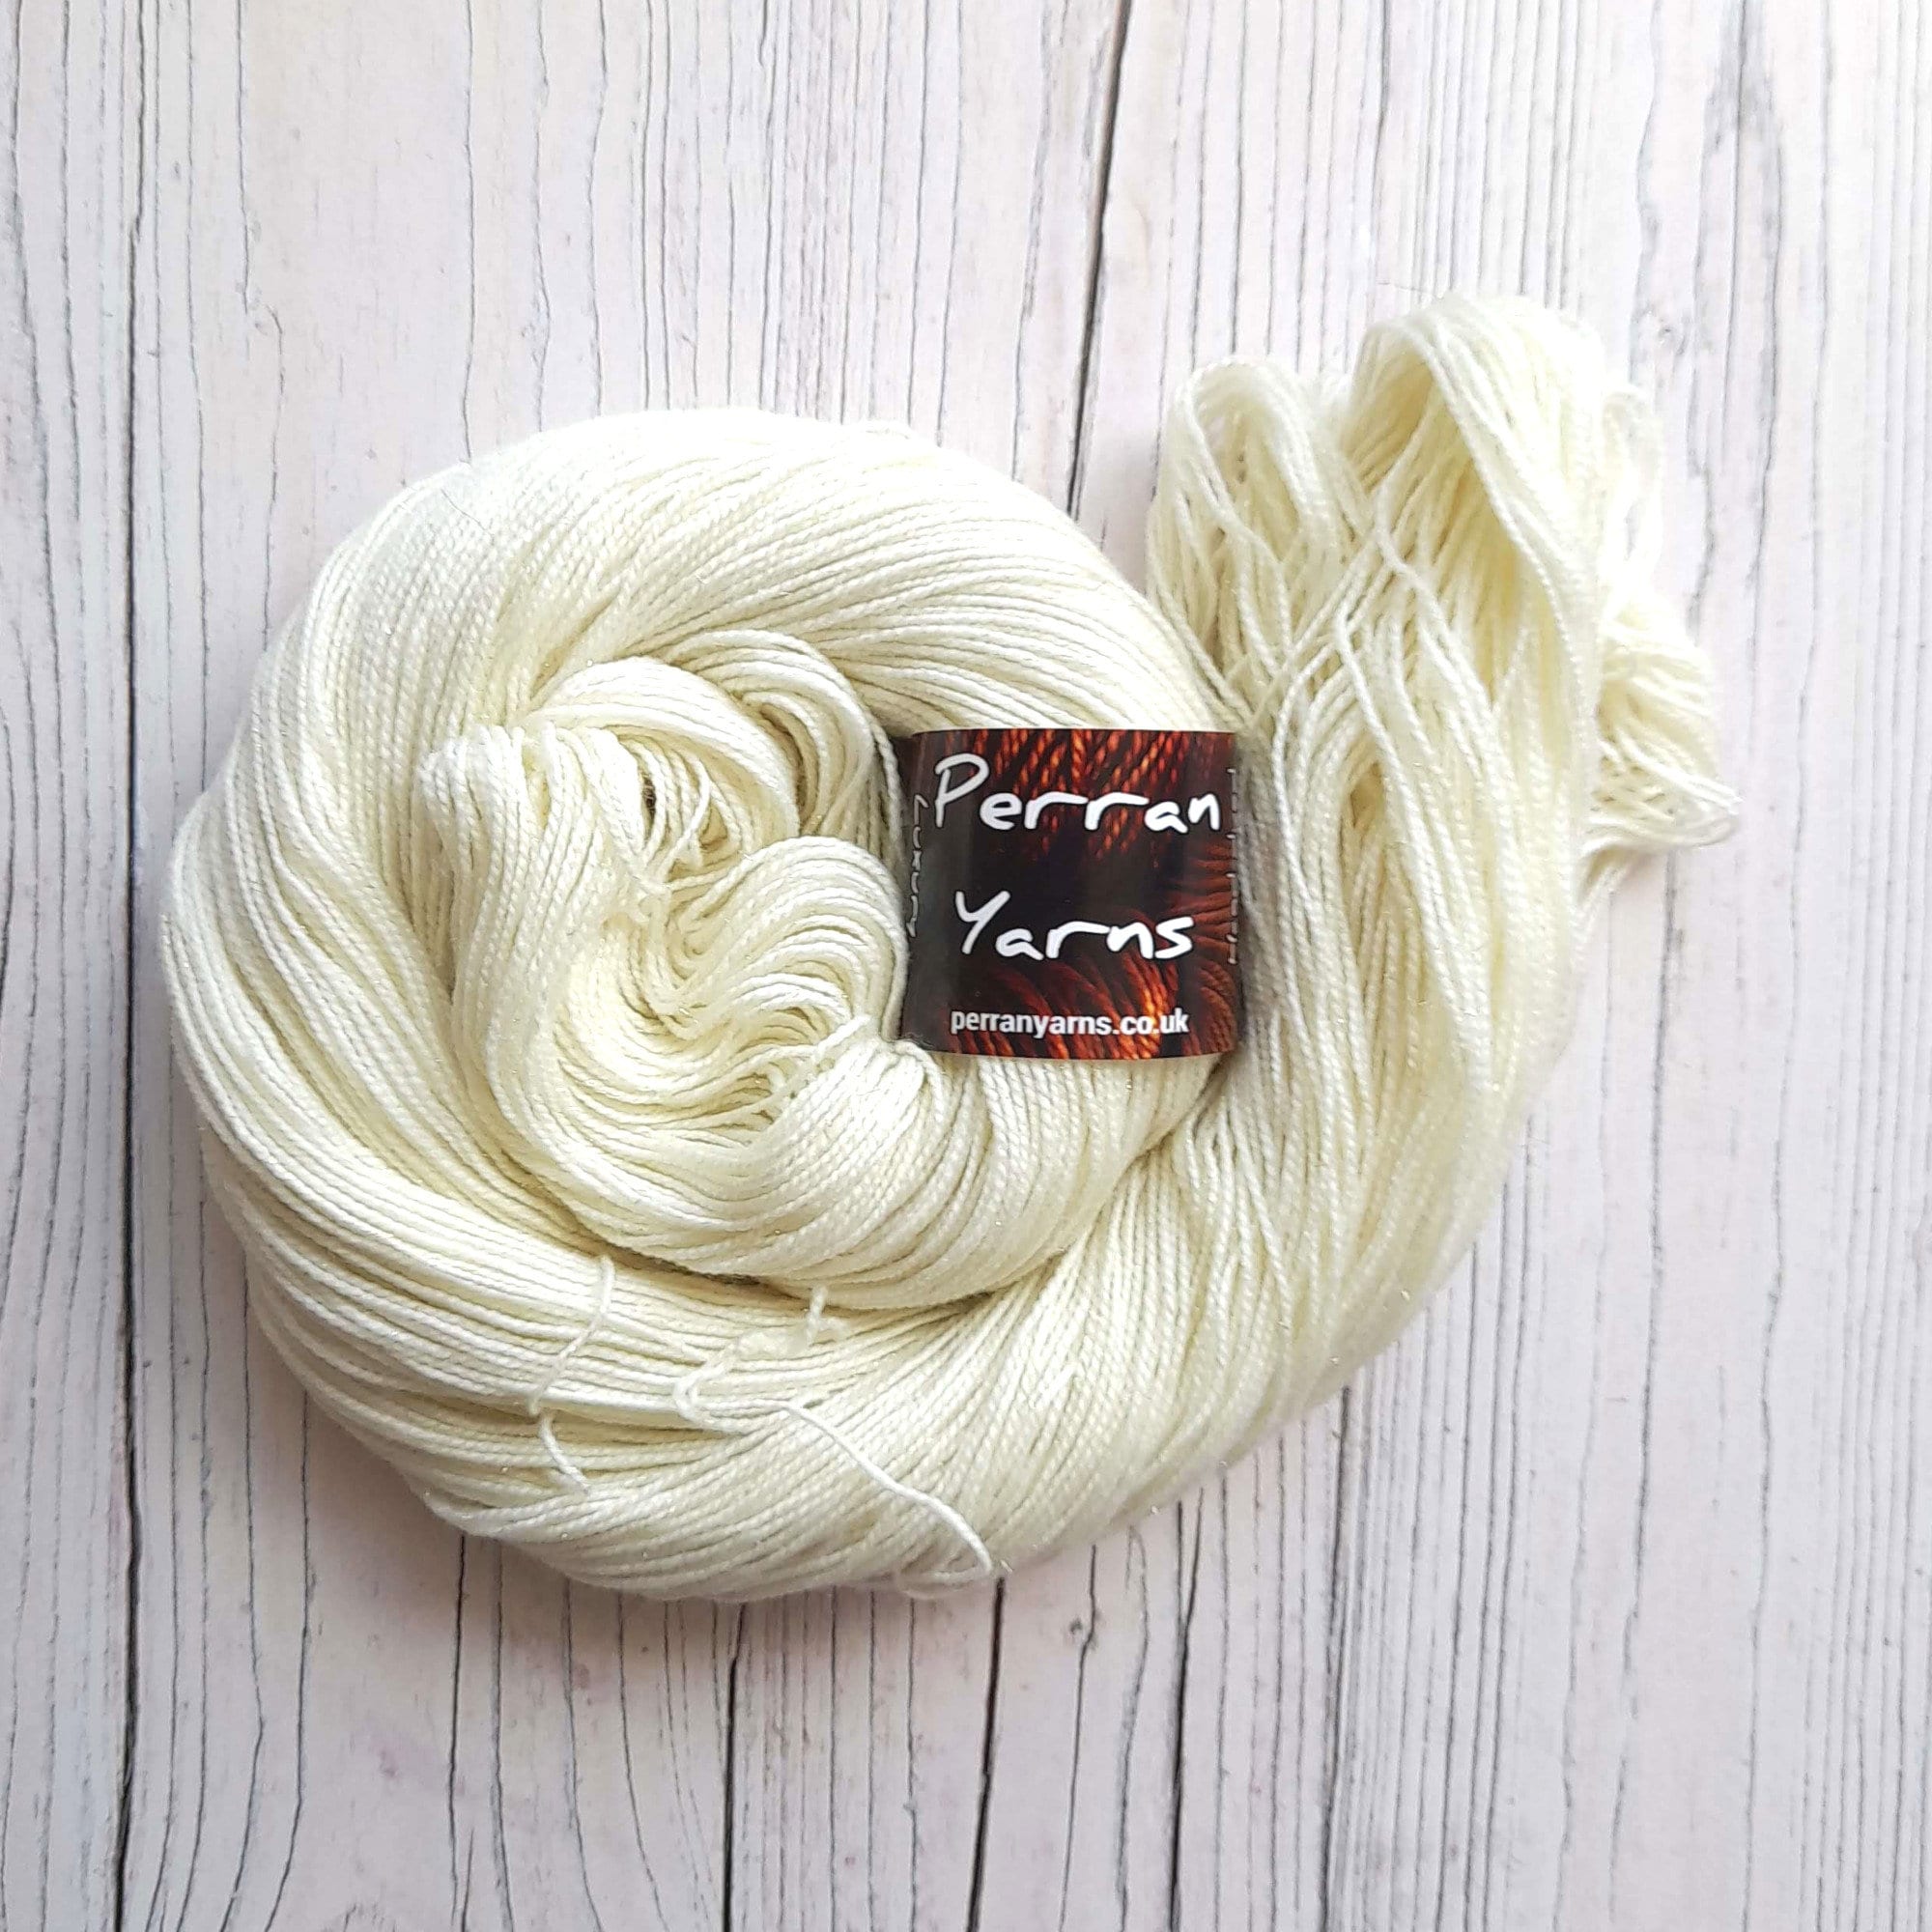 Undyed Yarn for Dyeing, Natural Skeins by Kraemer Yarns